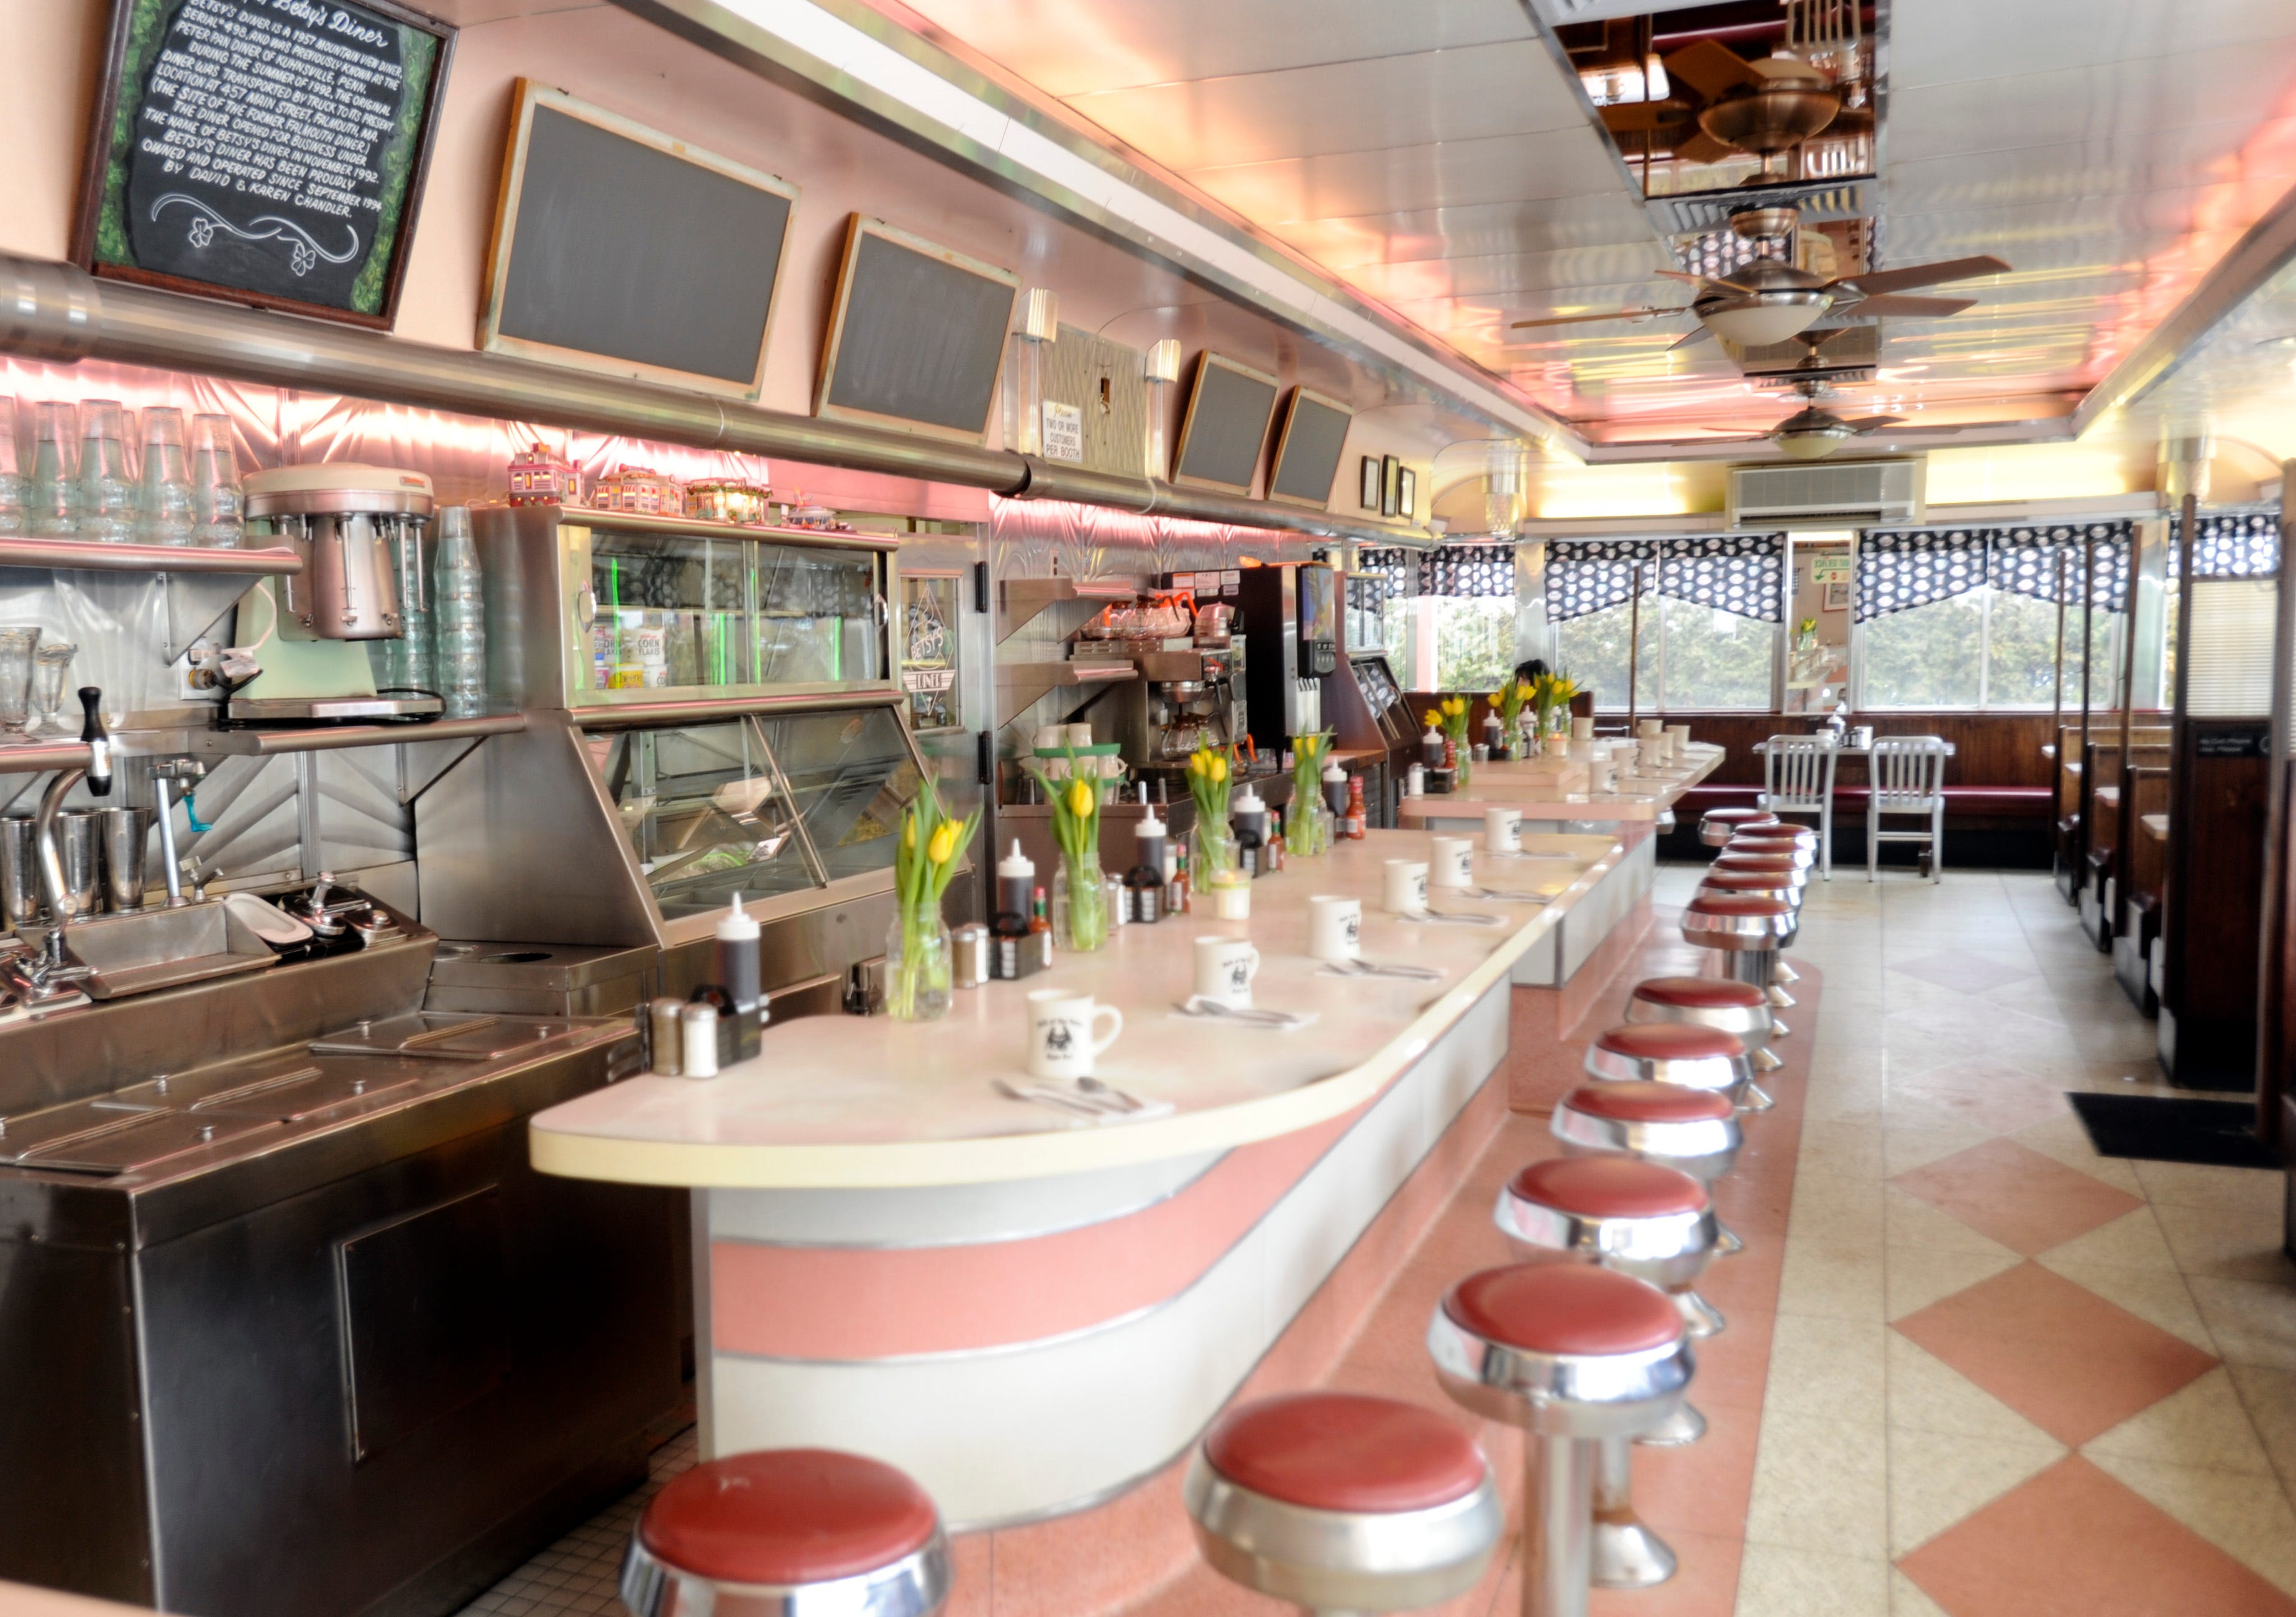 A long old-fashion diner counter but all pink